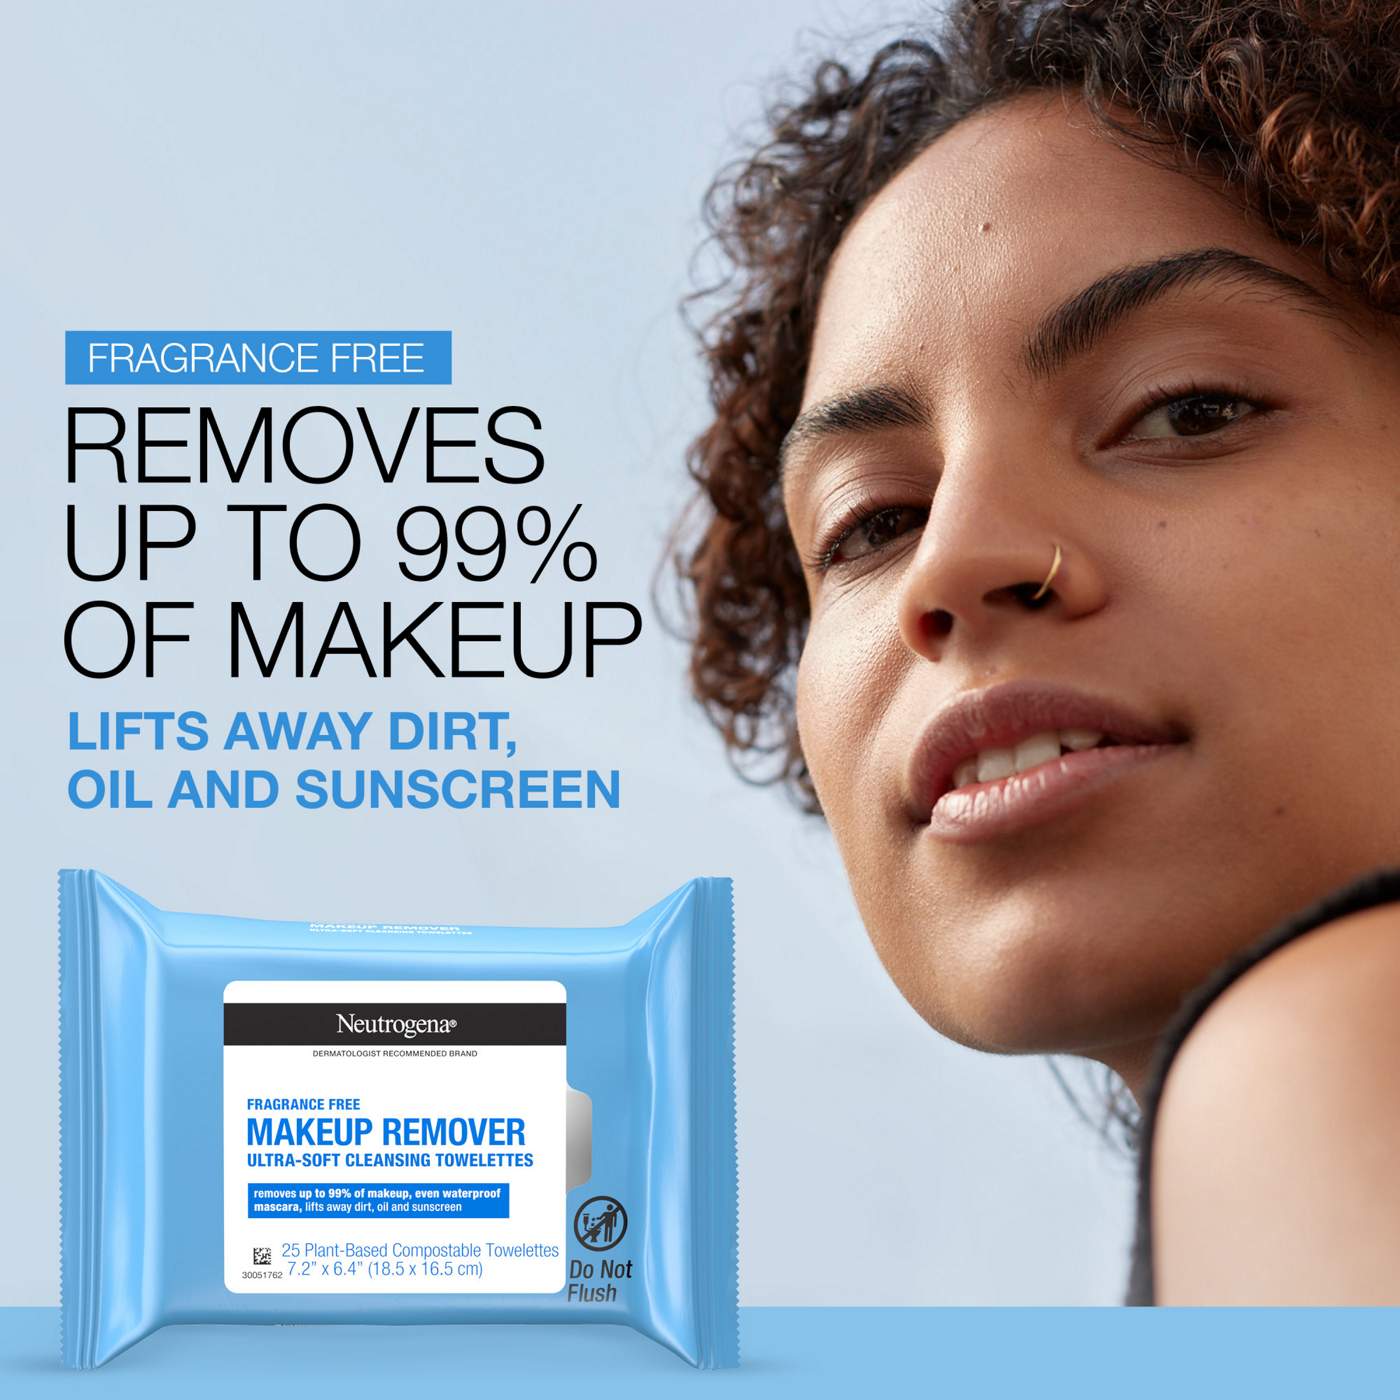 Neutrogena Makeup Remover Cleansing Towelettes - Fragrance Free; image 7 of 8